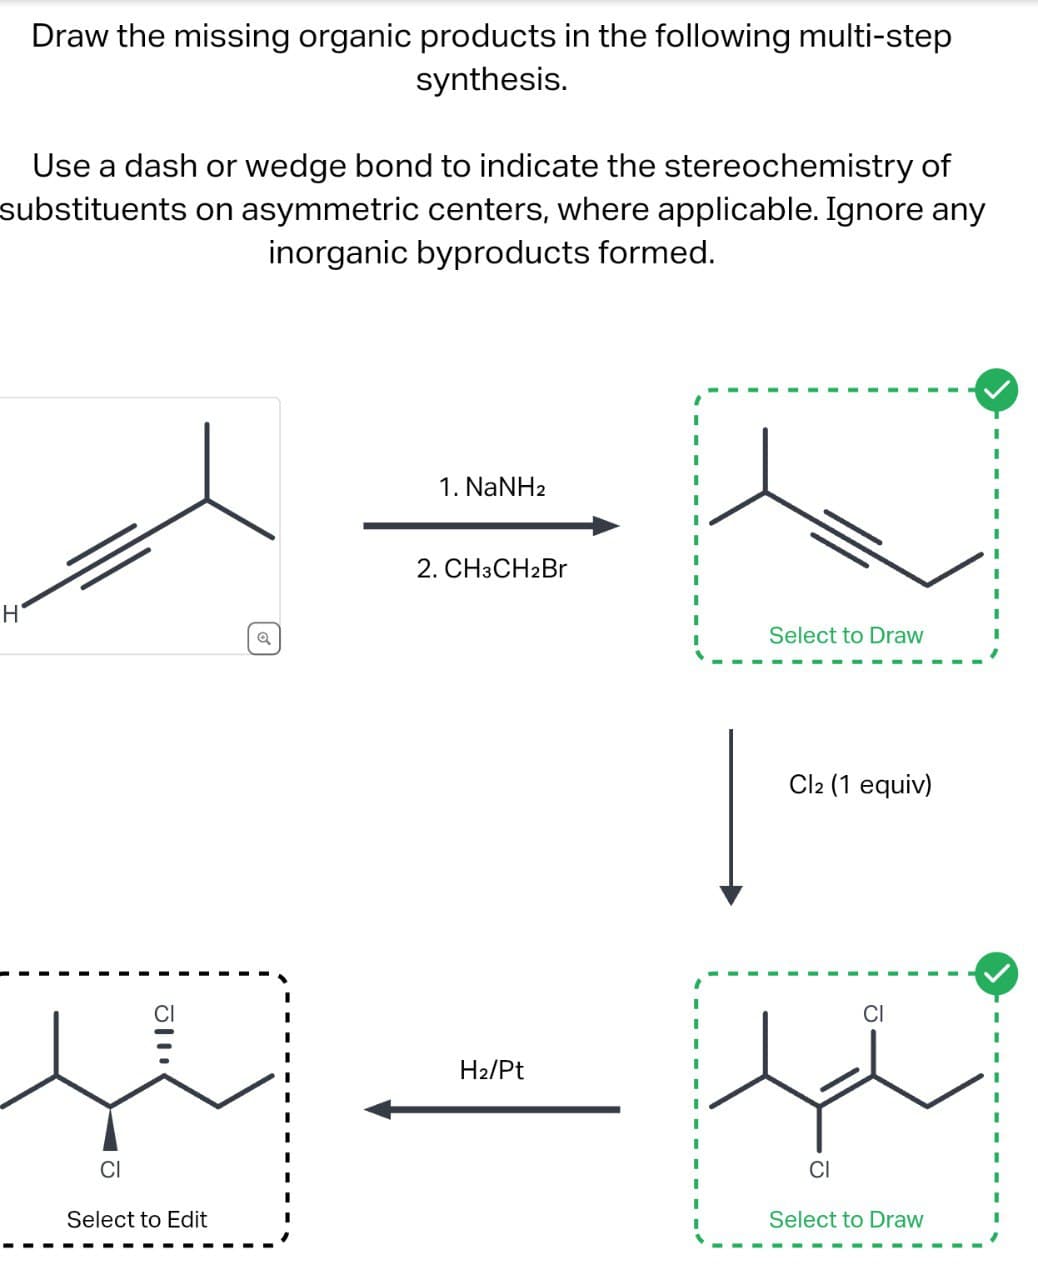 H
Draw the missing organic products in the following multi-step
synthesis.
Use a dash or wedge bond to indicate the stereochemistry of
substituents on asymmetric centers, where applicable. Ignore any
inorganic byproducts formed.
1112
CI
Select to Edit
a
1. NaNH2
2. CH3CH2Br
H2/Pt
Select to Draw
Cl2 (1 equiv)
CI
Select to Draw